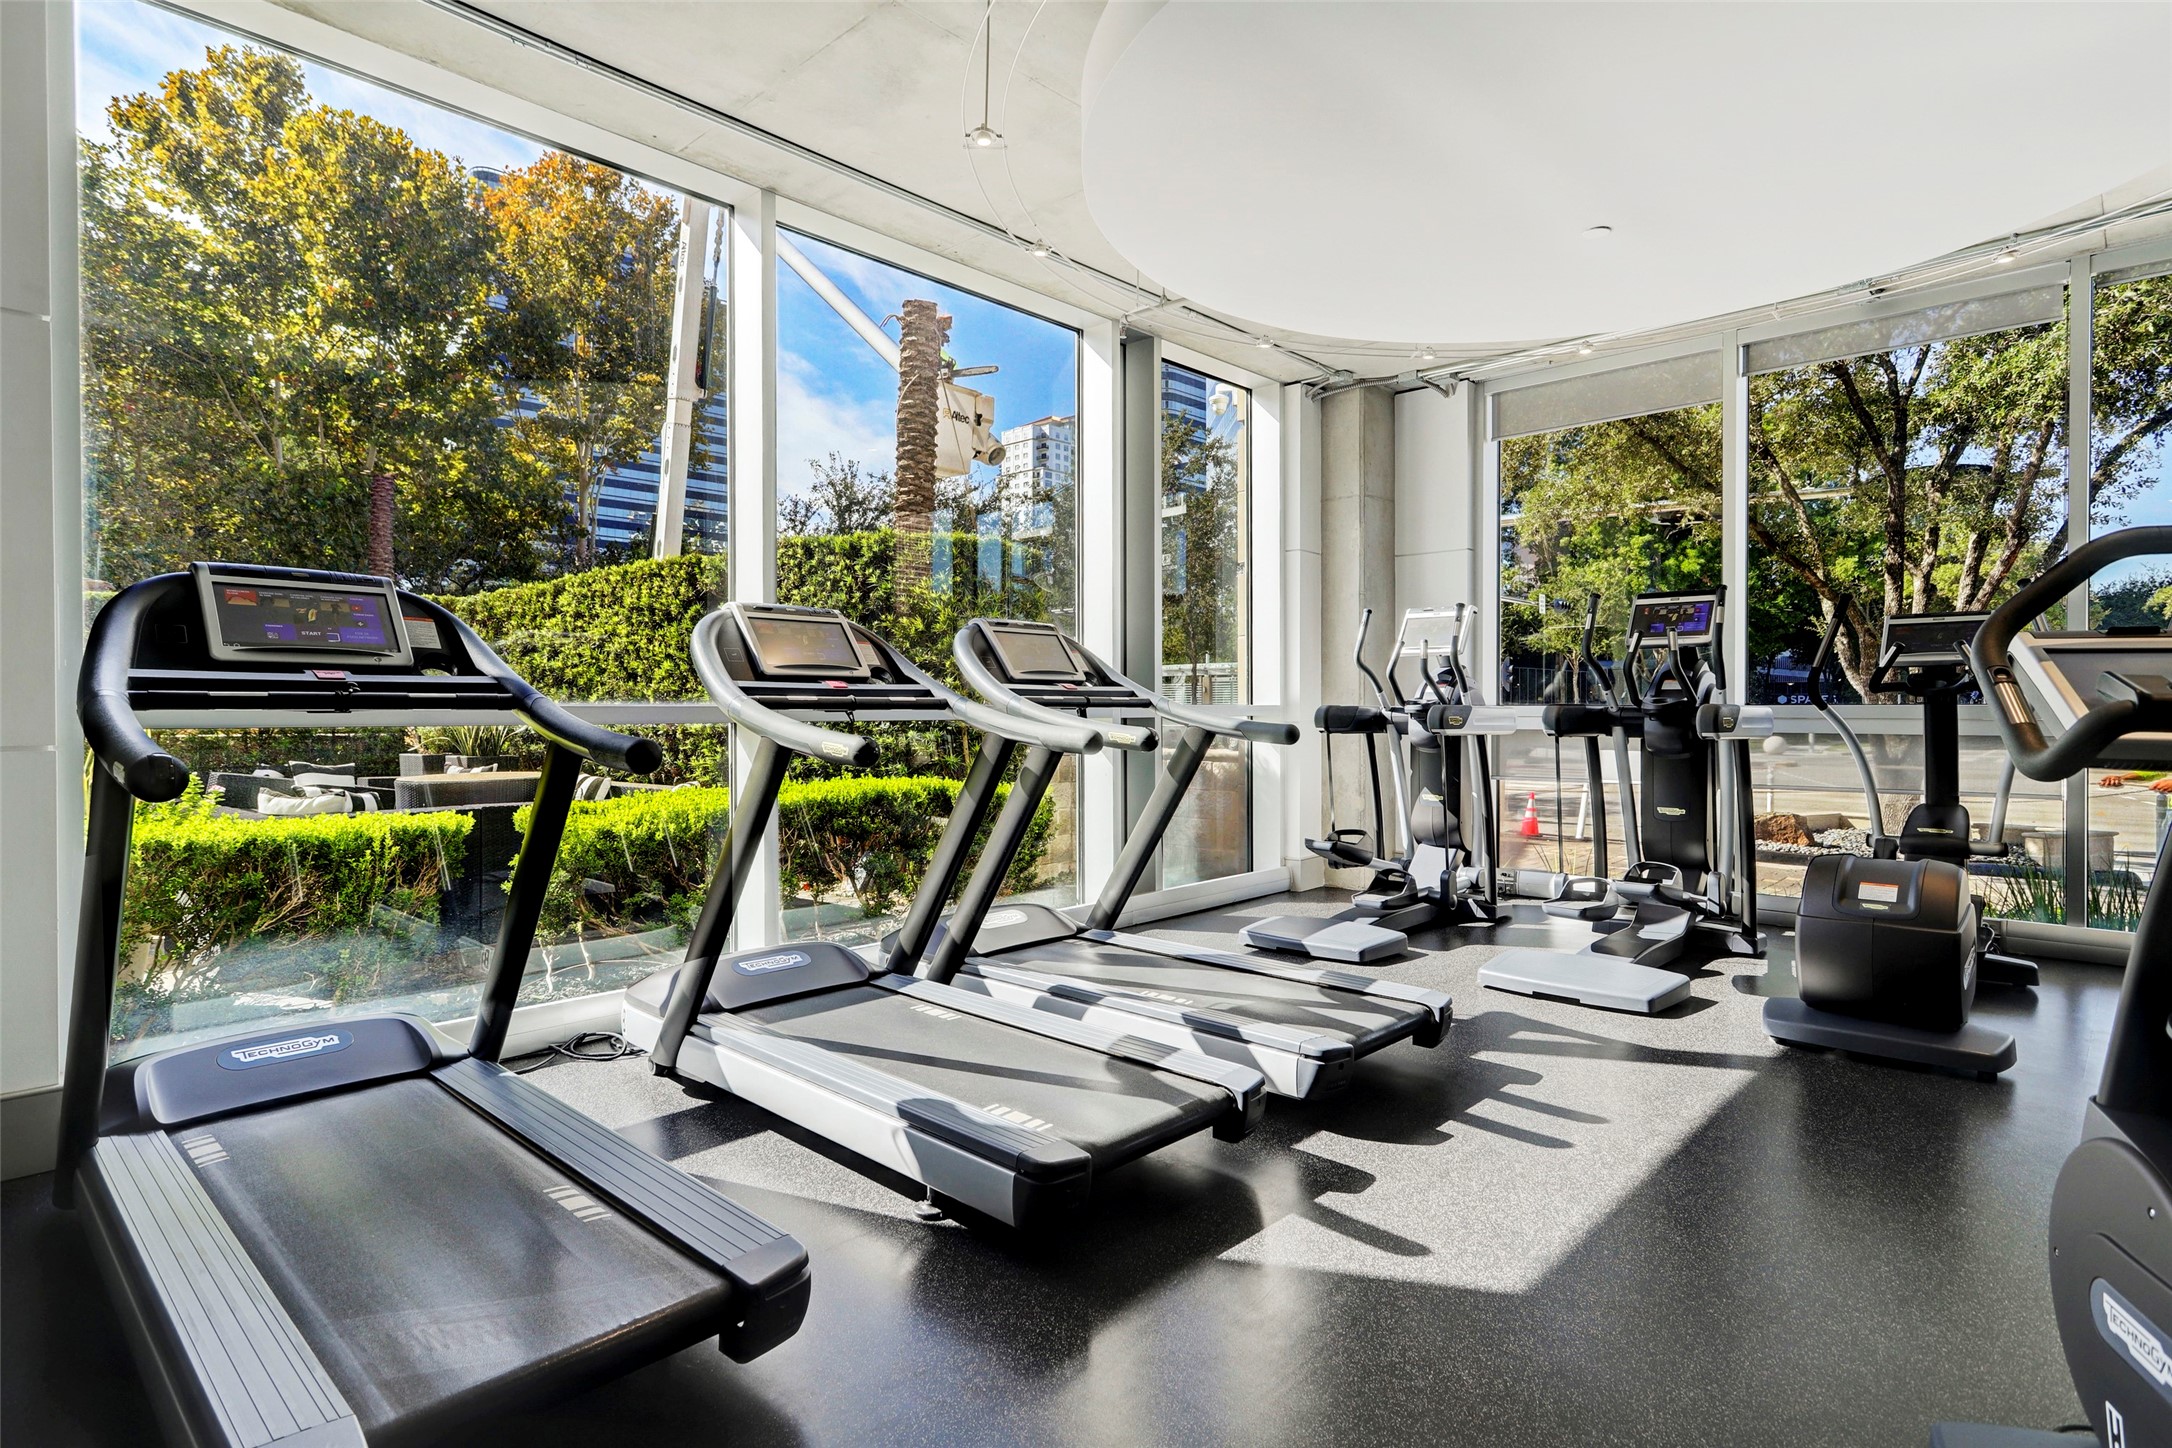 Plenty of cardio equipment in this 24-hour secured fitness center. Floor-to-ceiling windows so you can enjoy the outdoors while working out.